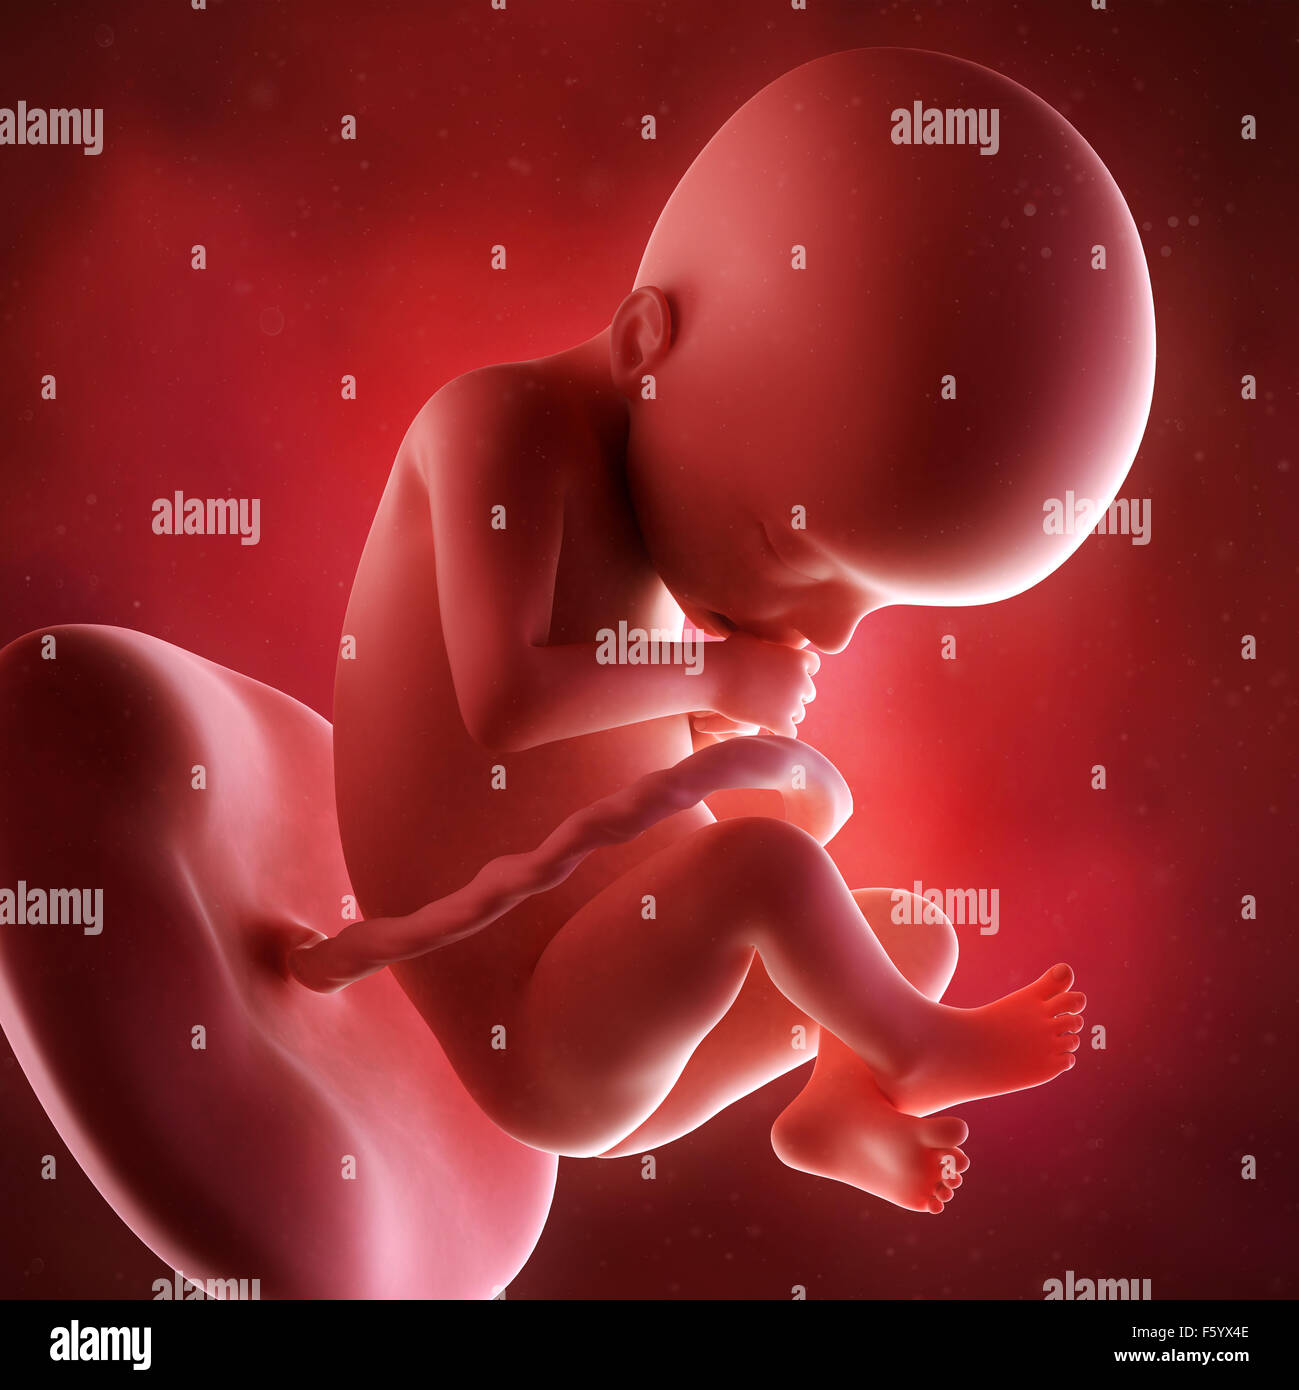 medical accurate 3d illustration of a fetus week 22 Stock Photo